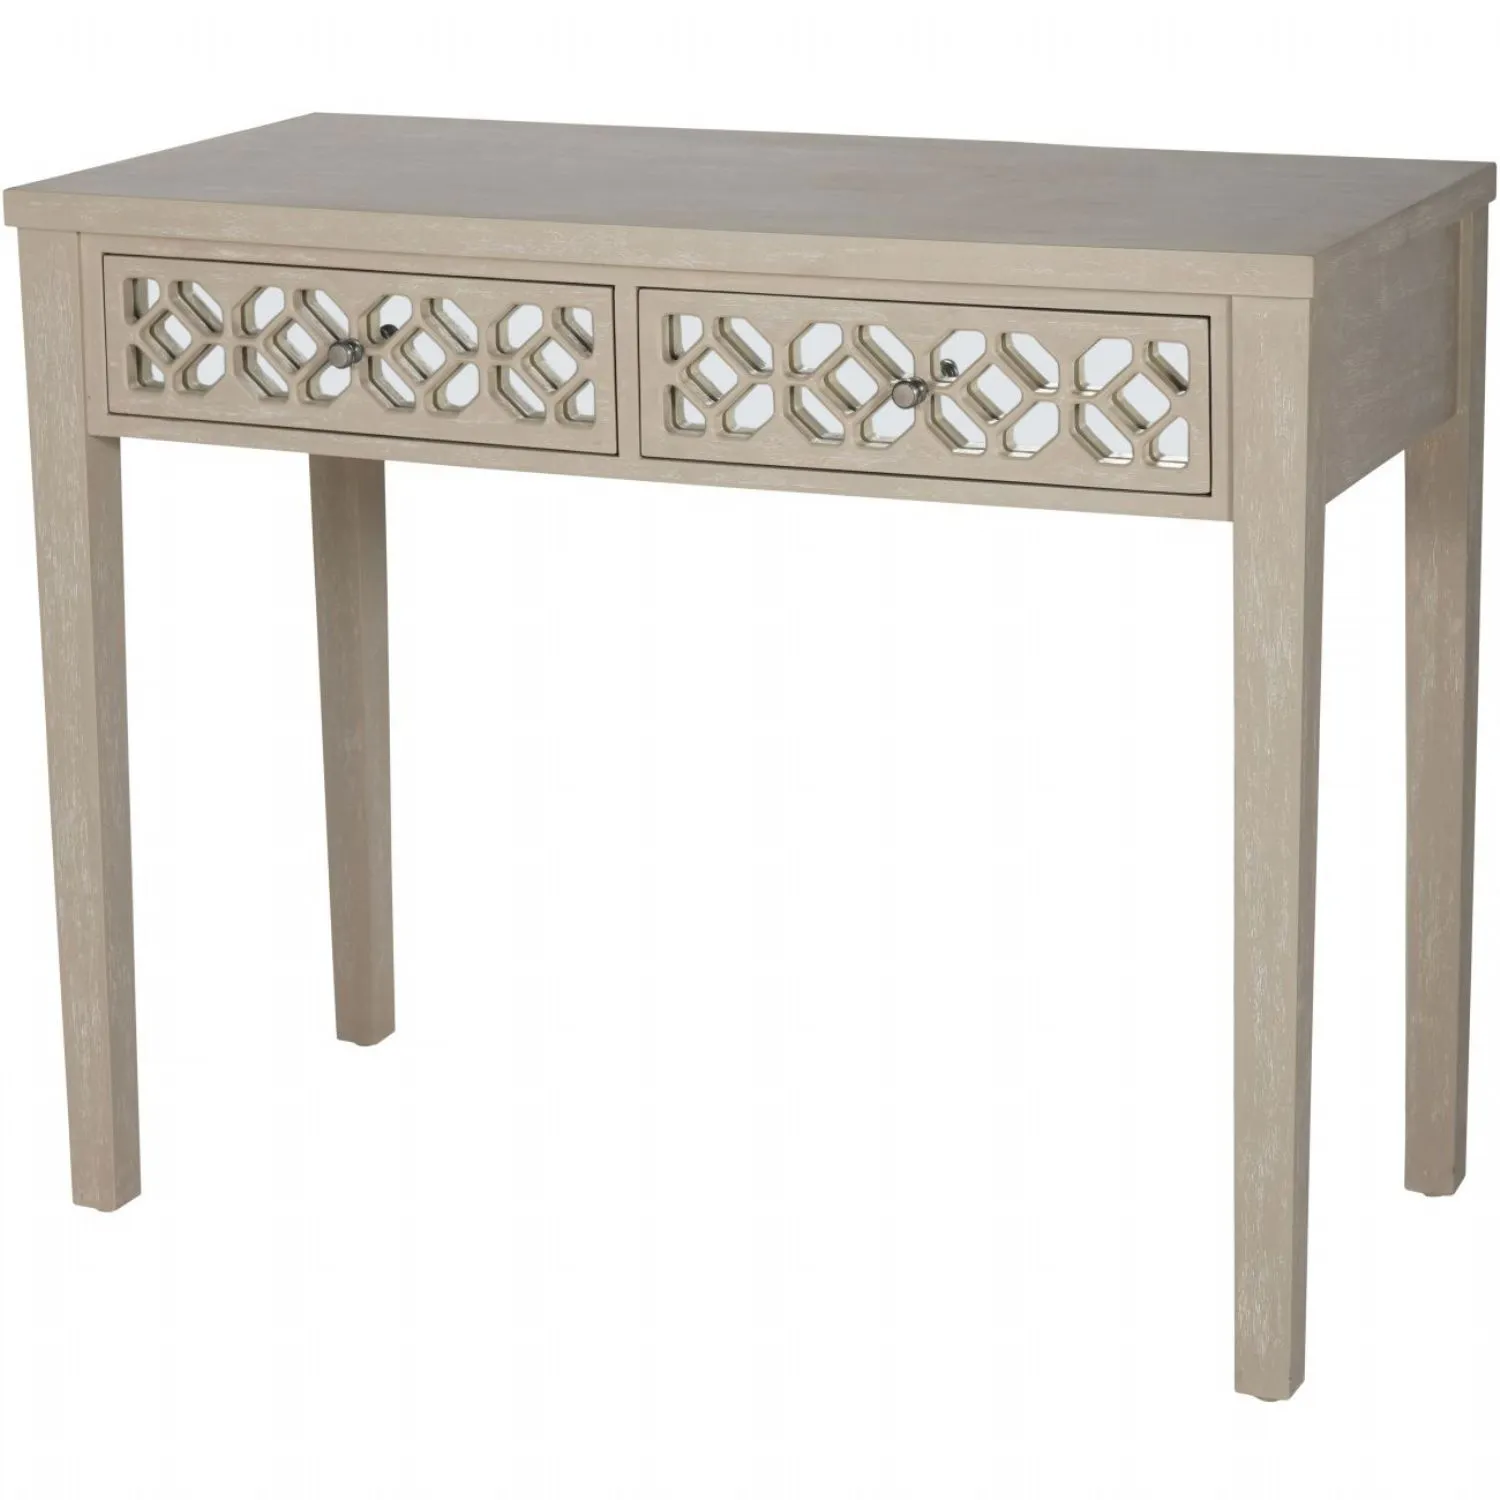 Distressed Grey Fretwork Wooden 2 Drawer Console Table